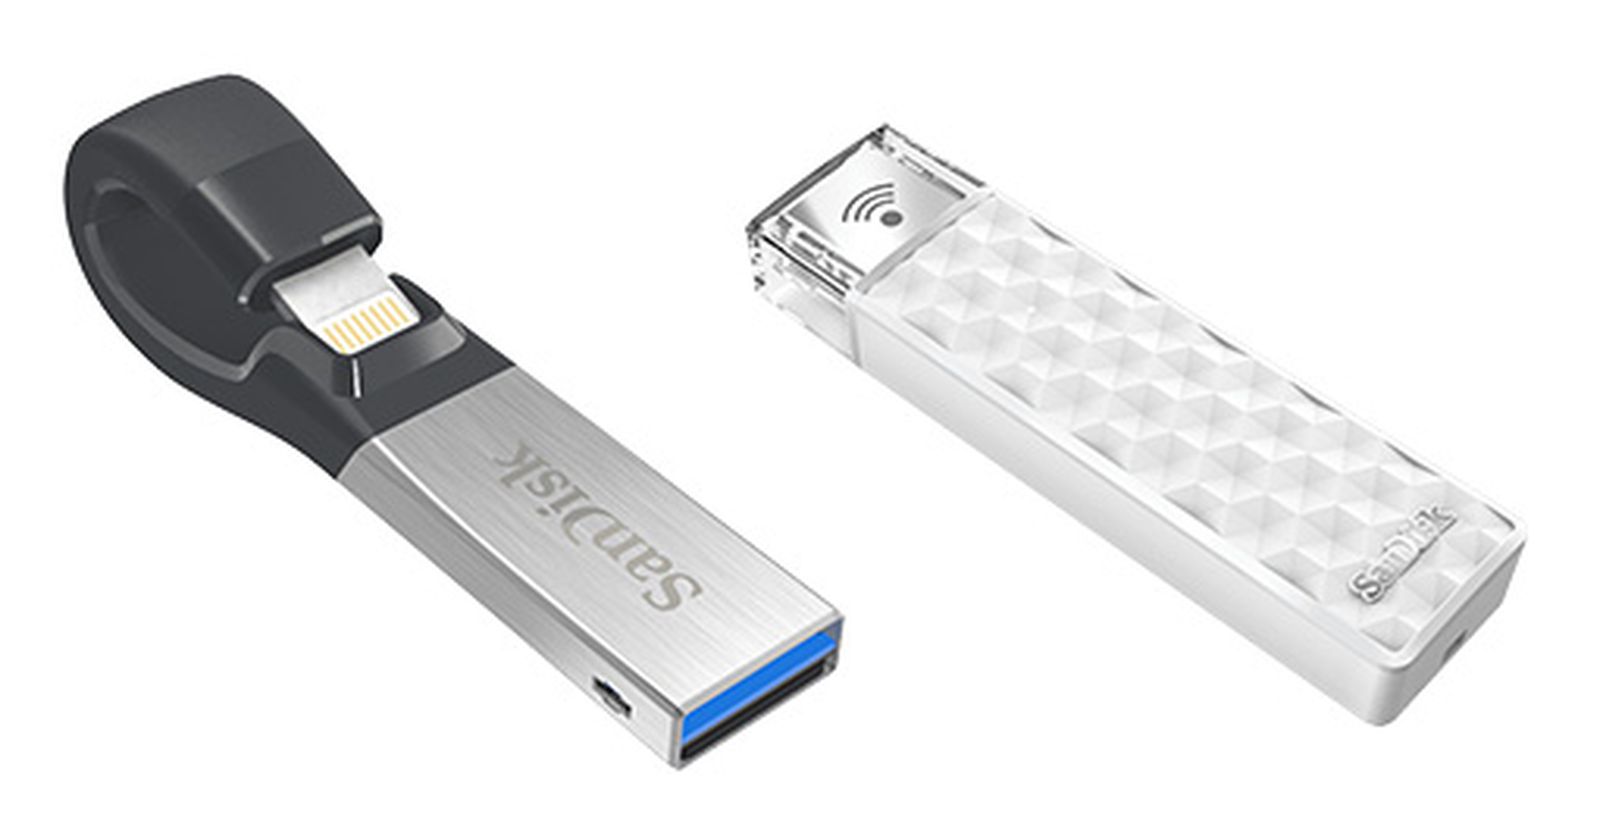 Kalksteen segment Ellende SanDisk Launches 256GB Flash Drive and Wireless Stick for iPhone and iPad -  MacRumors